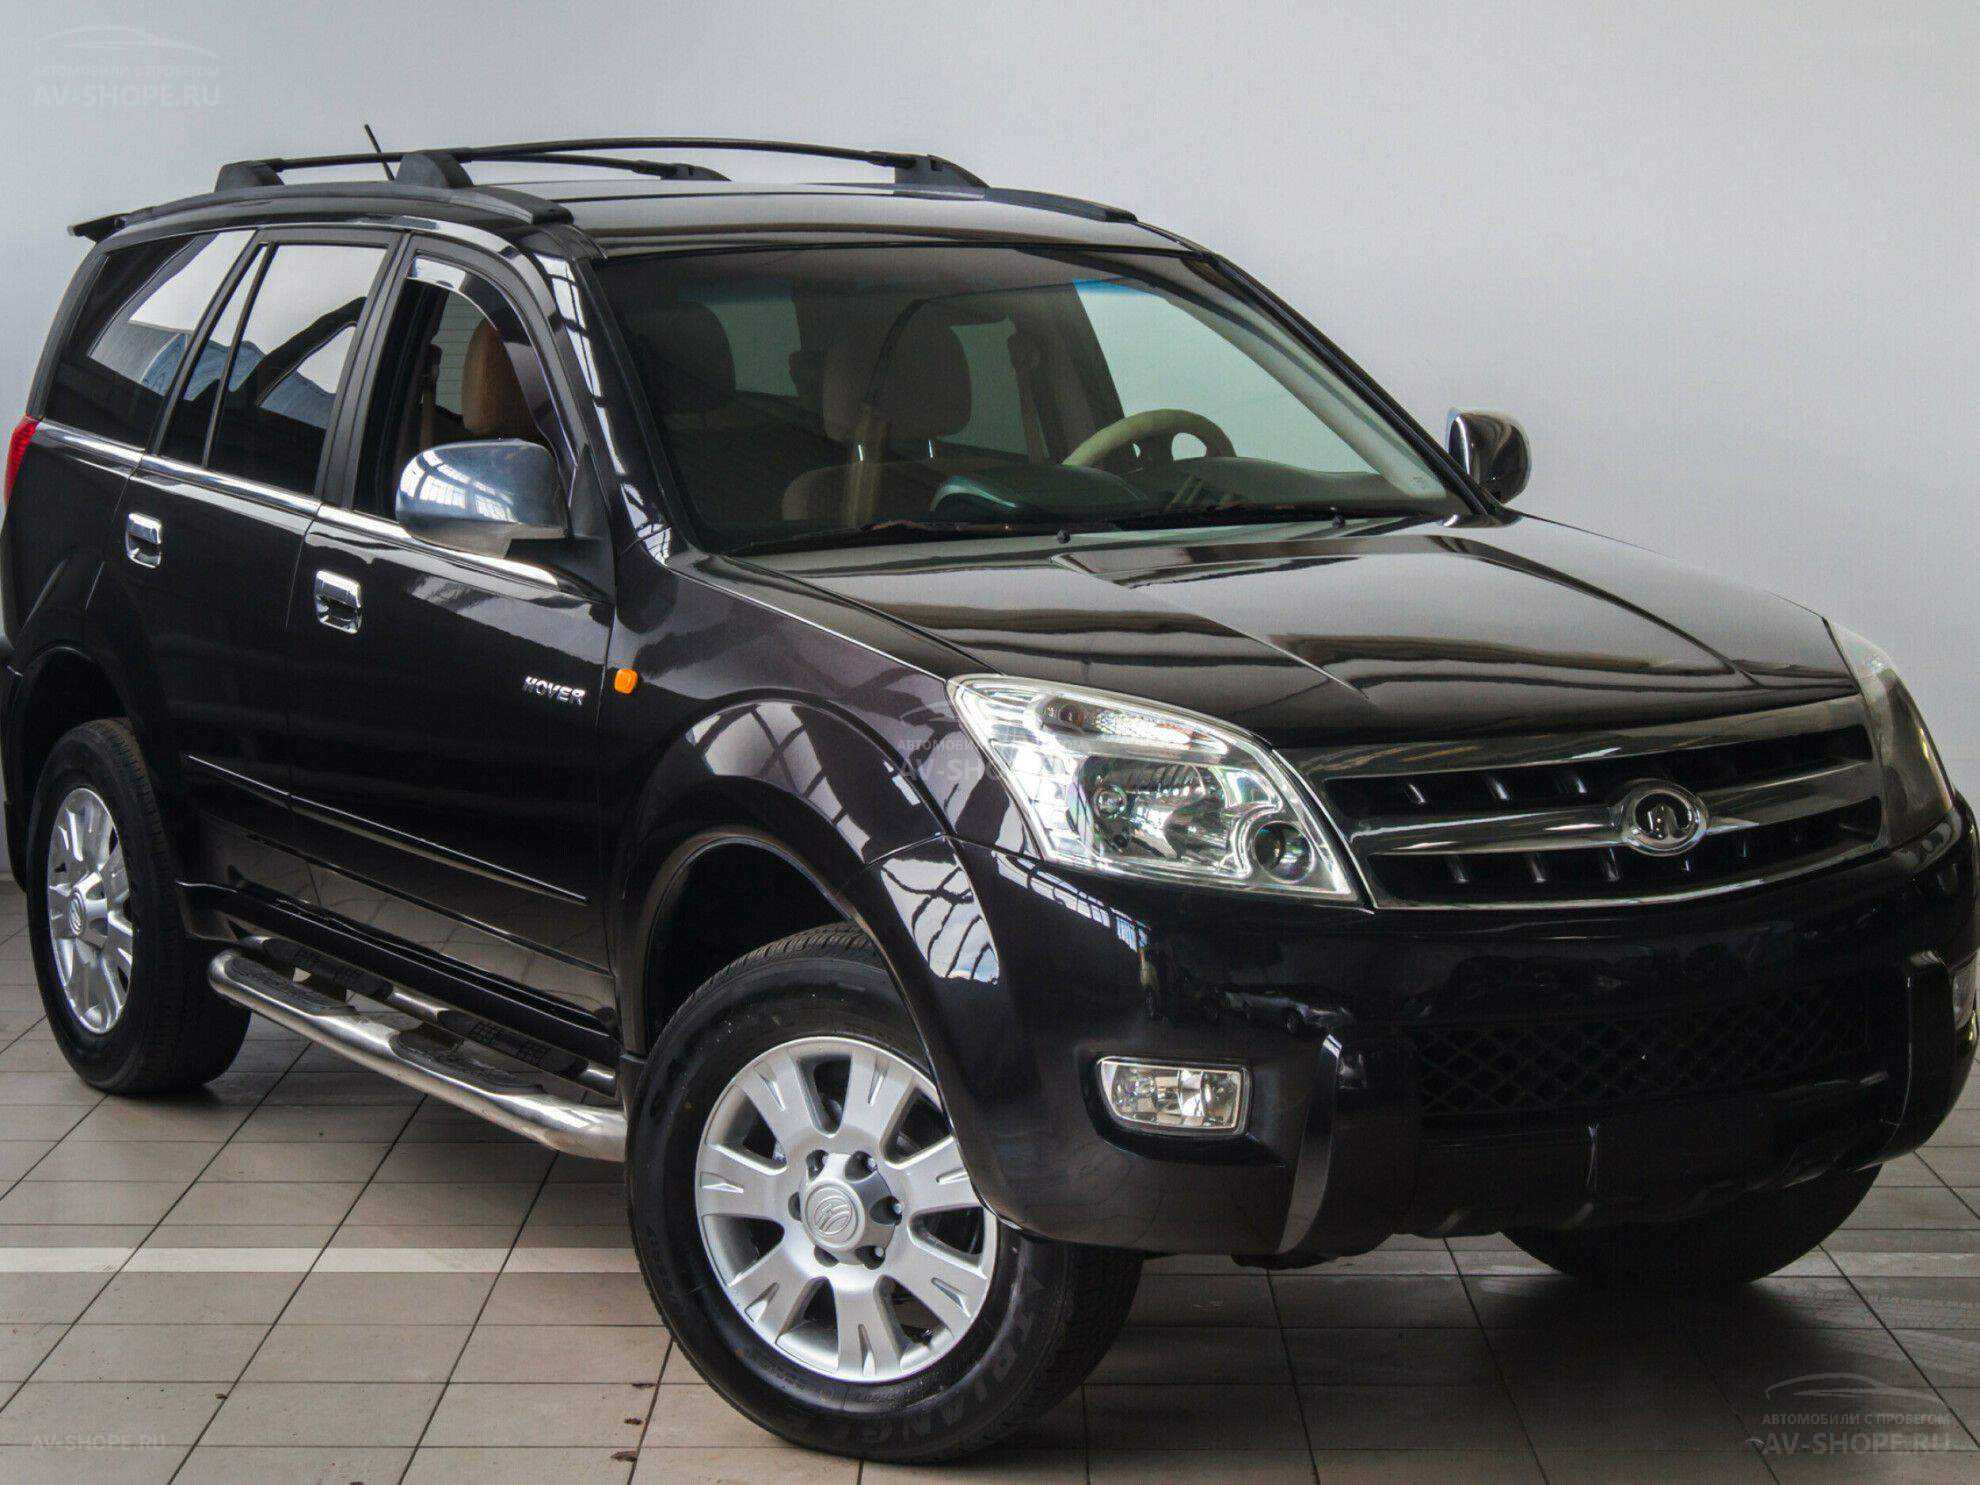 Ховер 2л. Great Wall Hover 2007. Great Wall Hover 2.4 МТ 2007. Great Wall Hover МТ 2.4 2010. Great Wall Hover h2 2007.